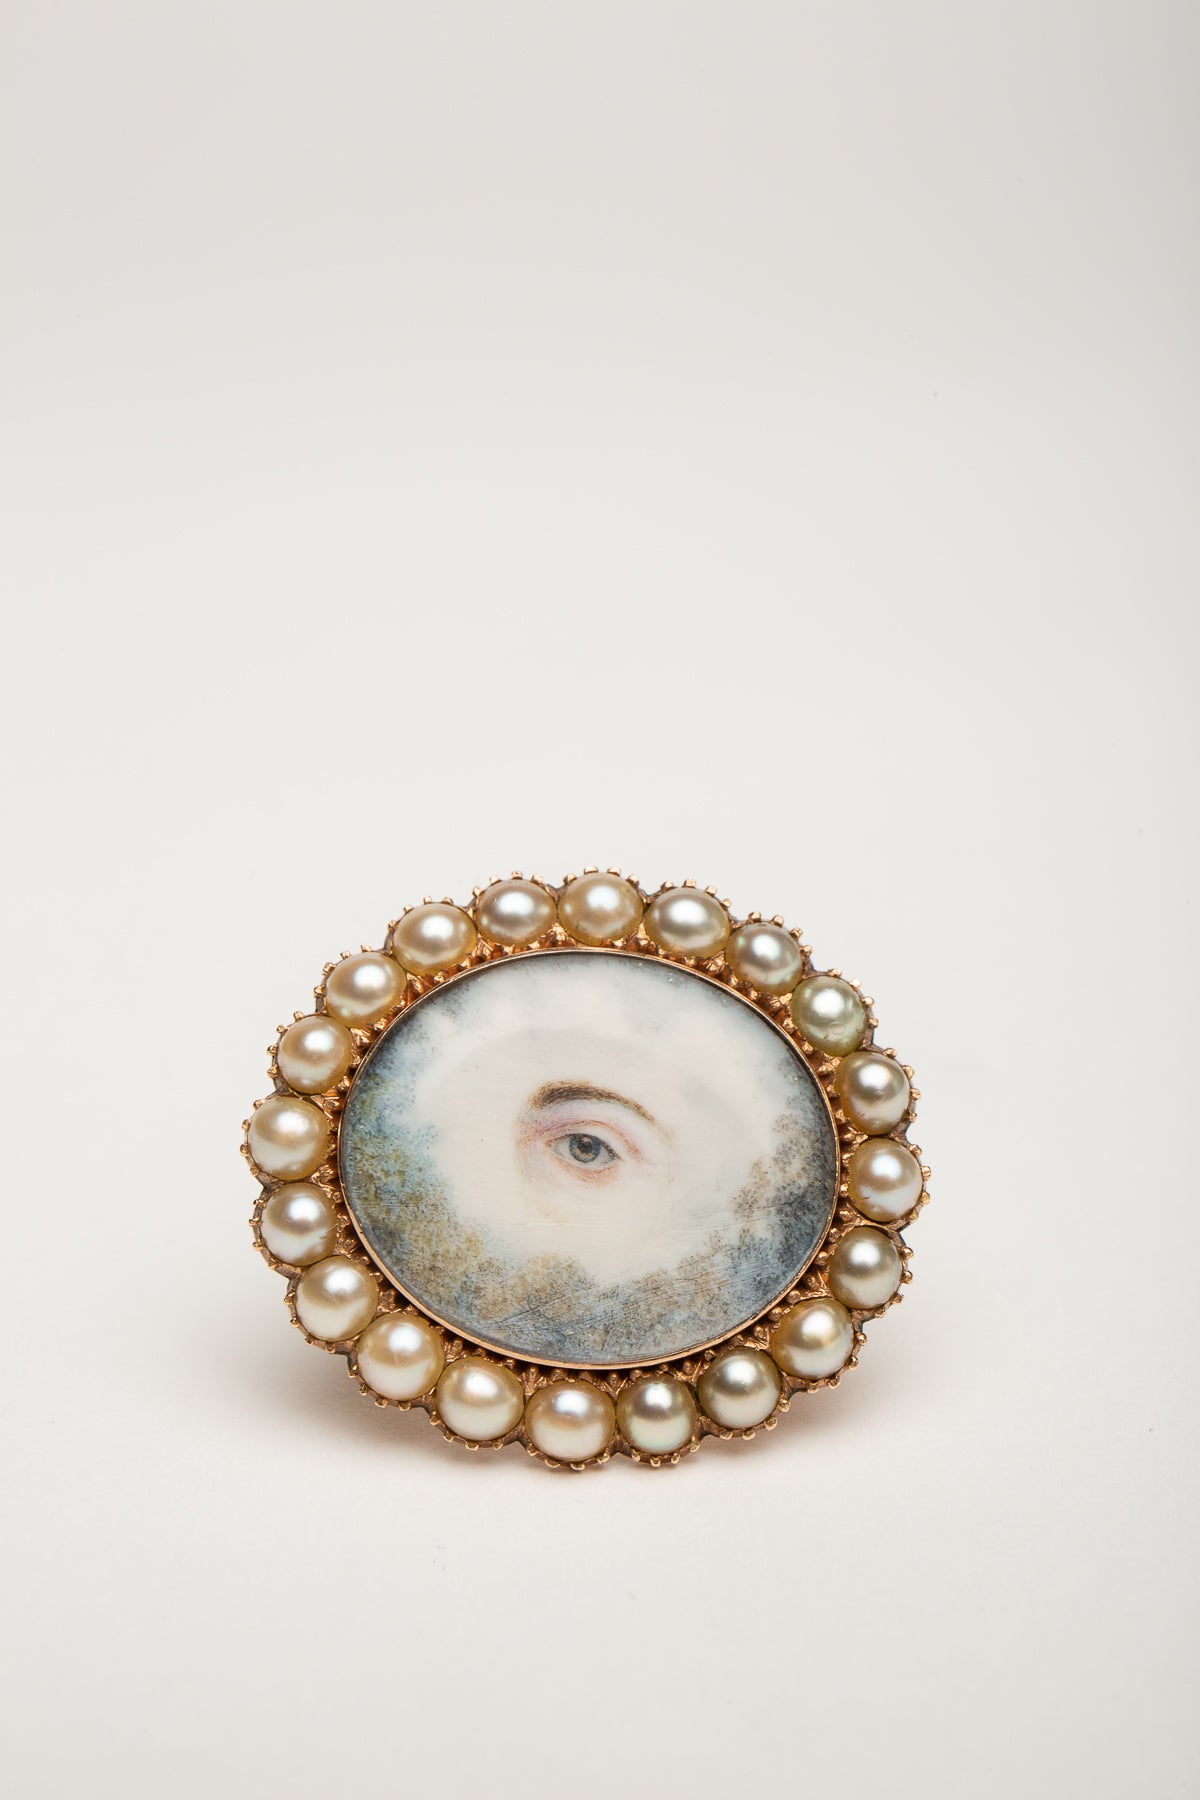 MAXFIELD PRIVATE COLLECTION | 1800'S PAINTED OVAL EYE PEARL RING